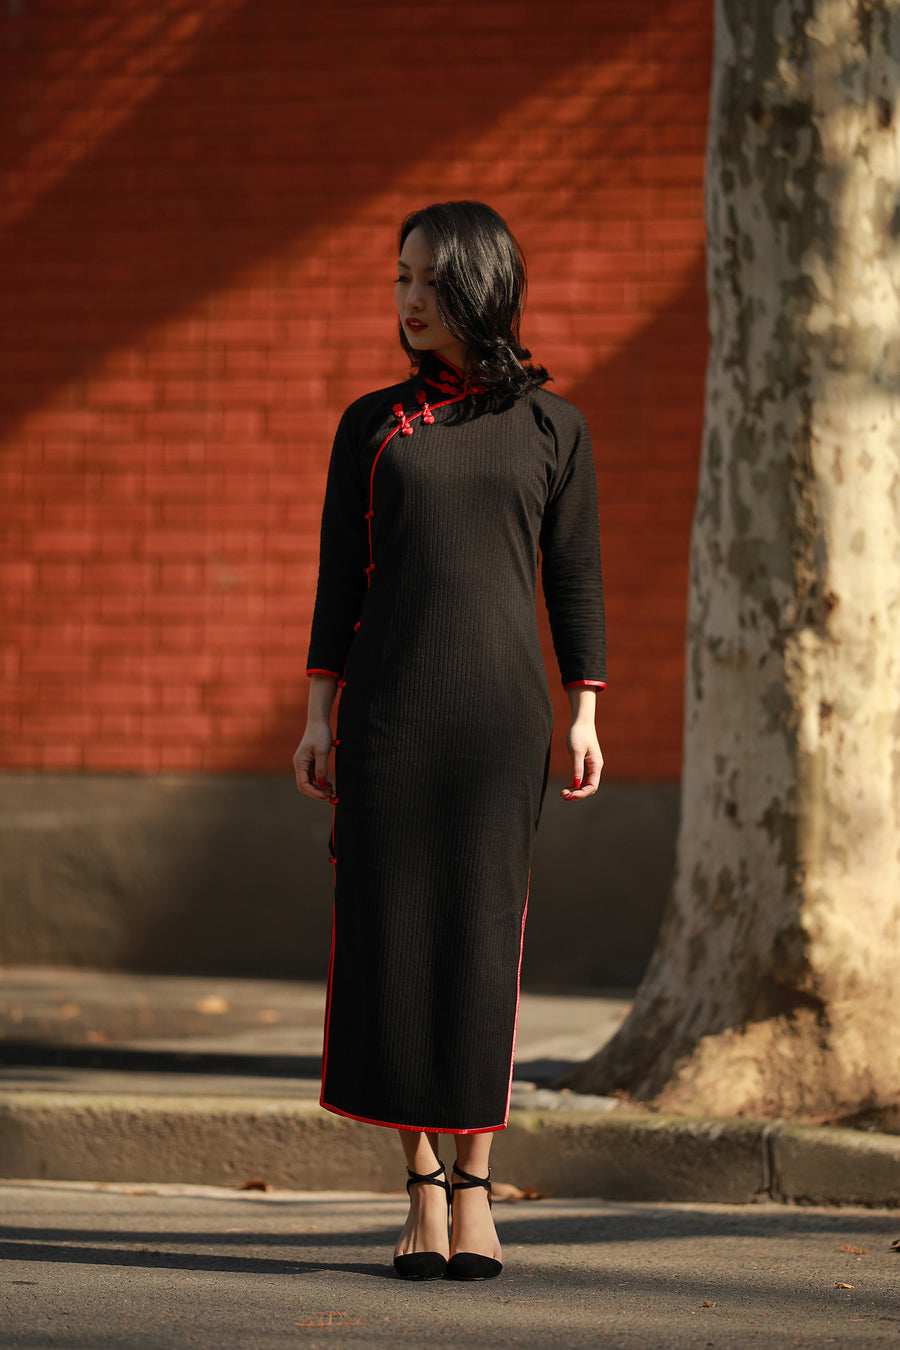 The Touch of Scarlet Qipao - Black with Red Edge